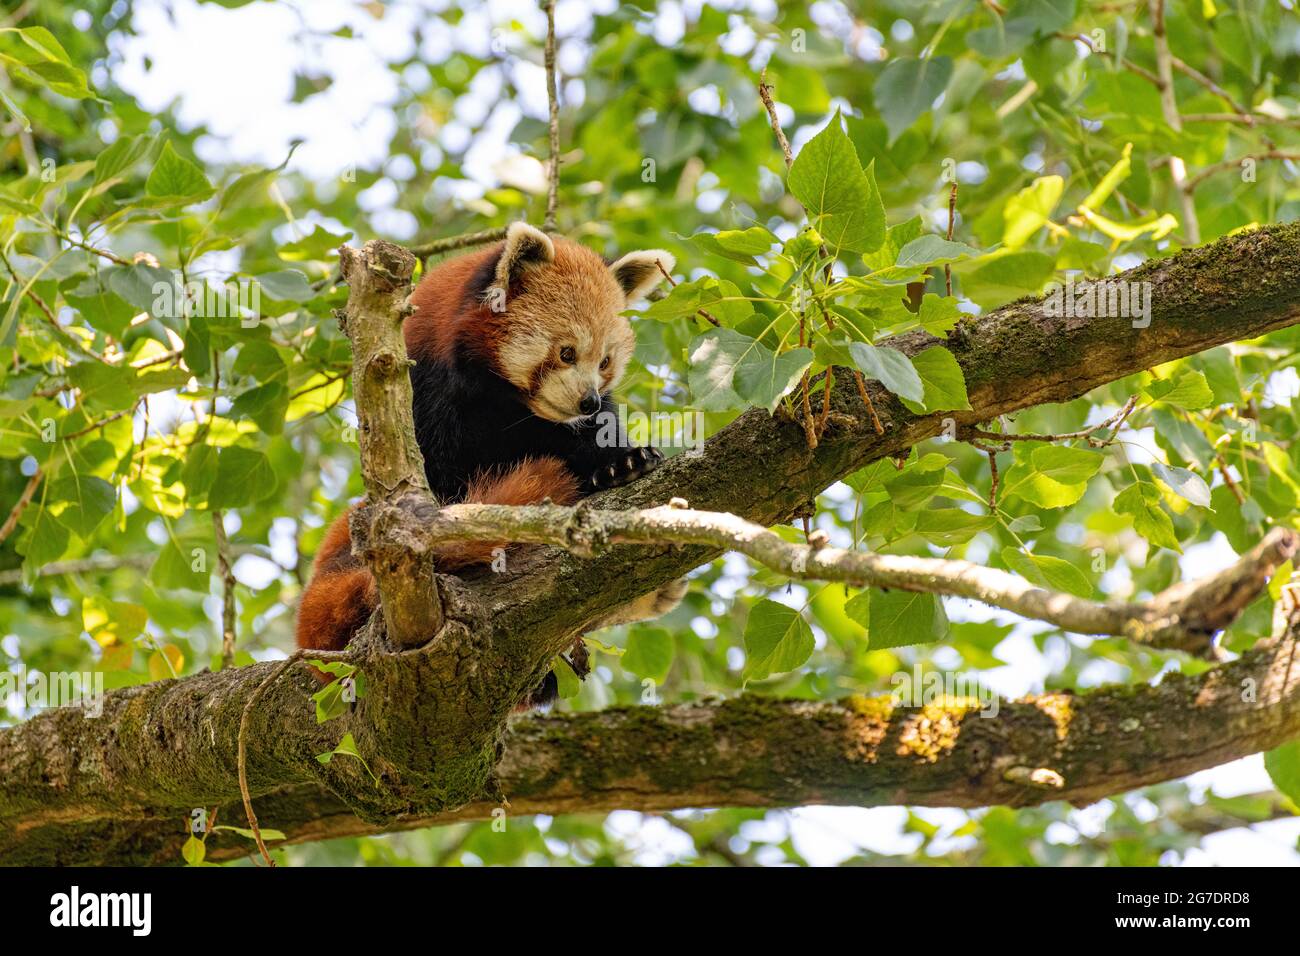 portrait of a red panda in a tree Stock Photo